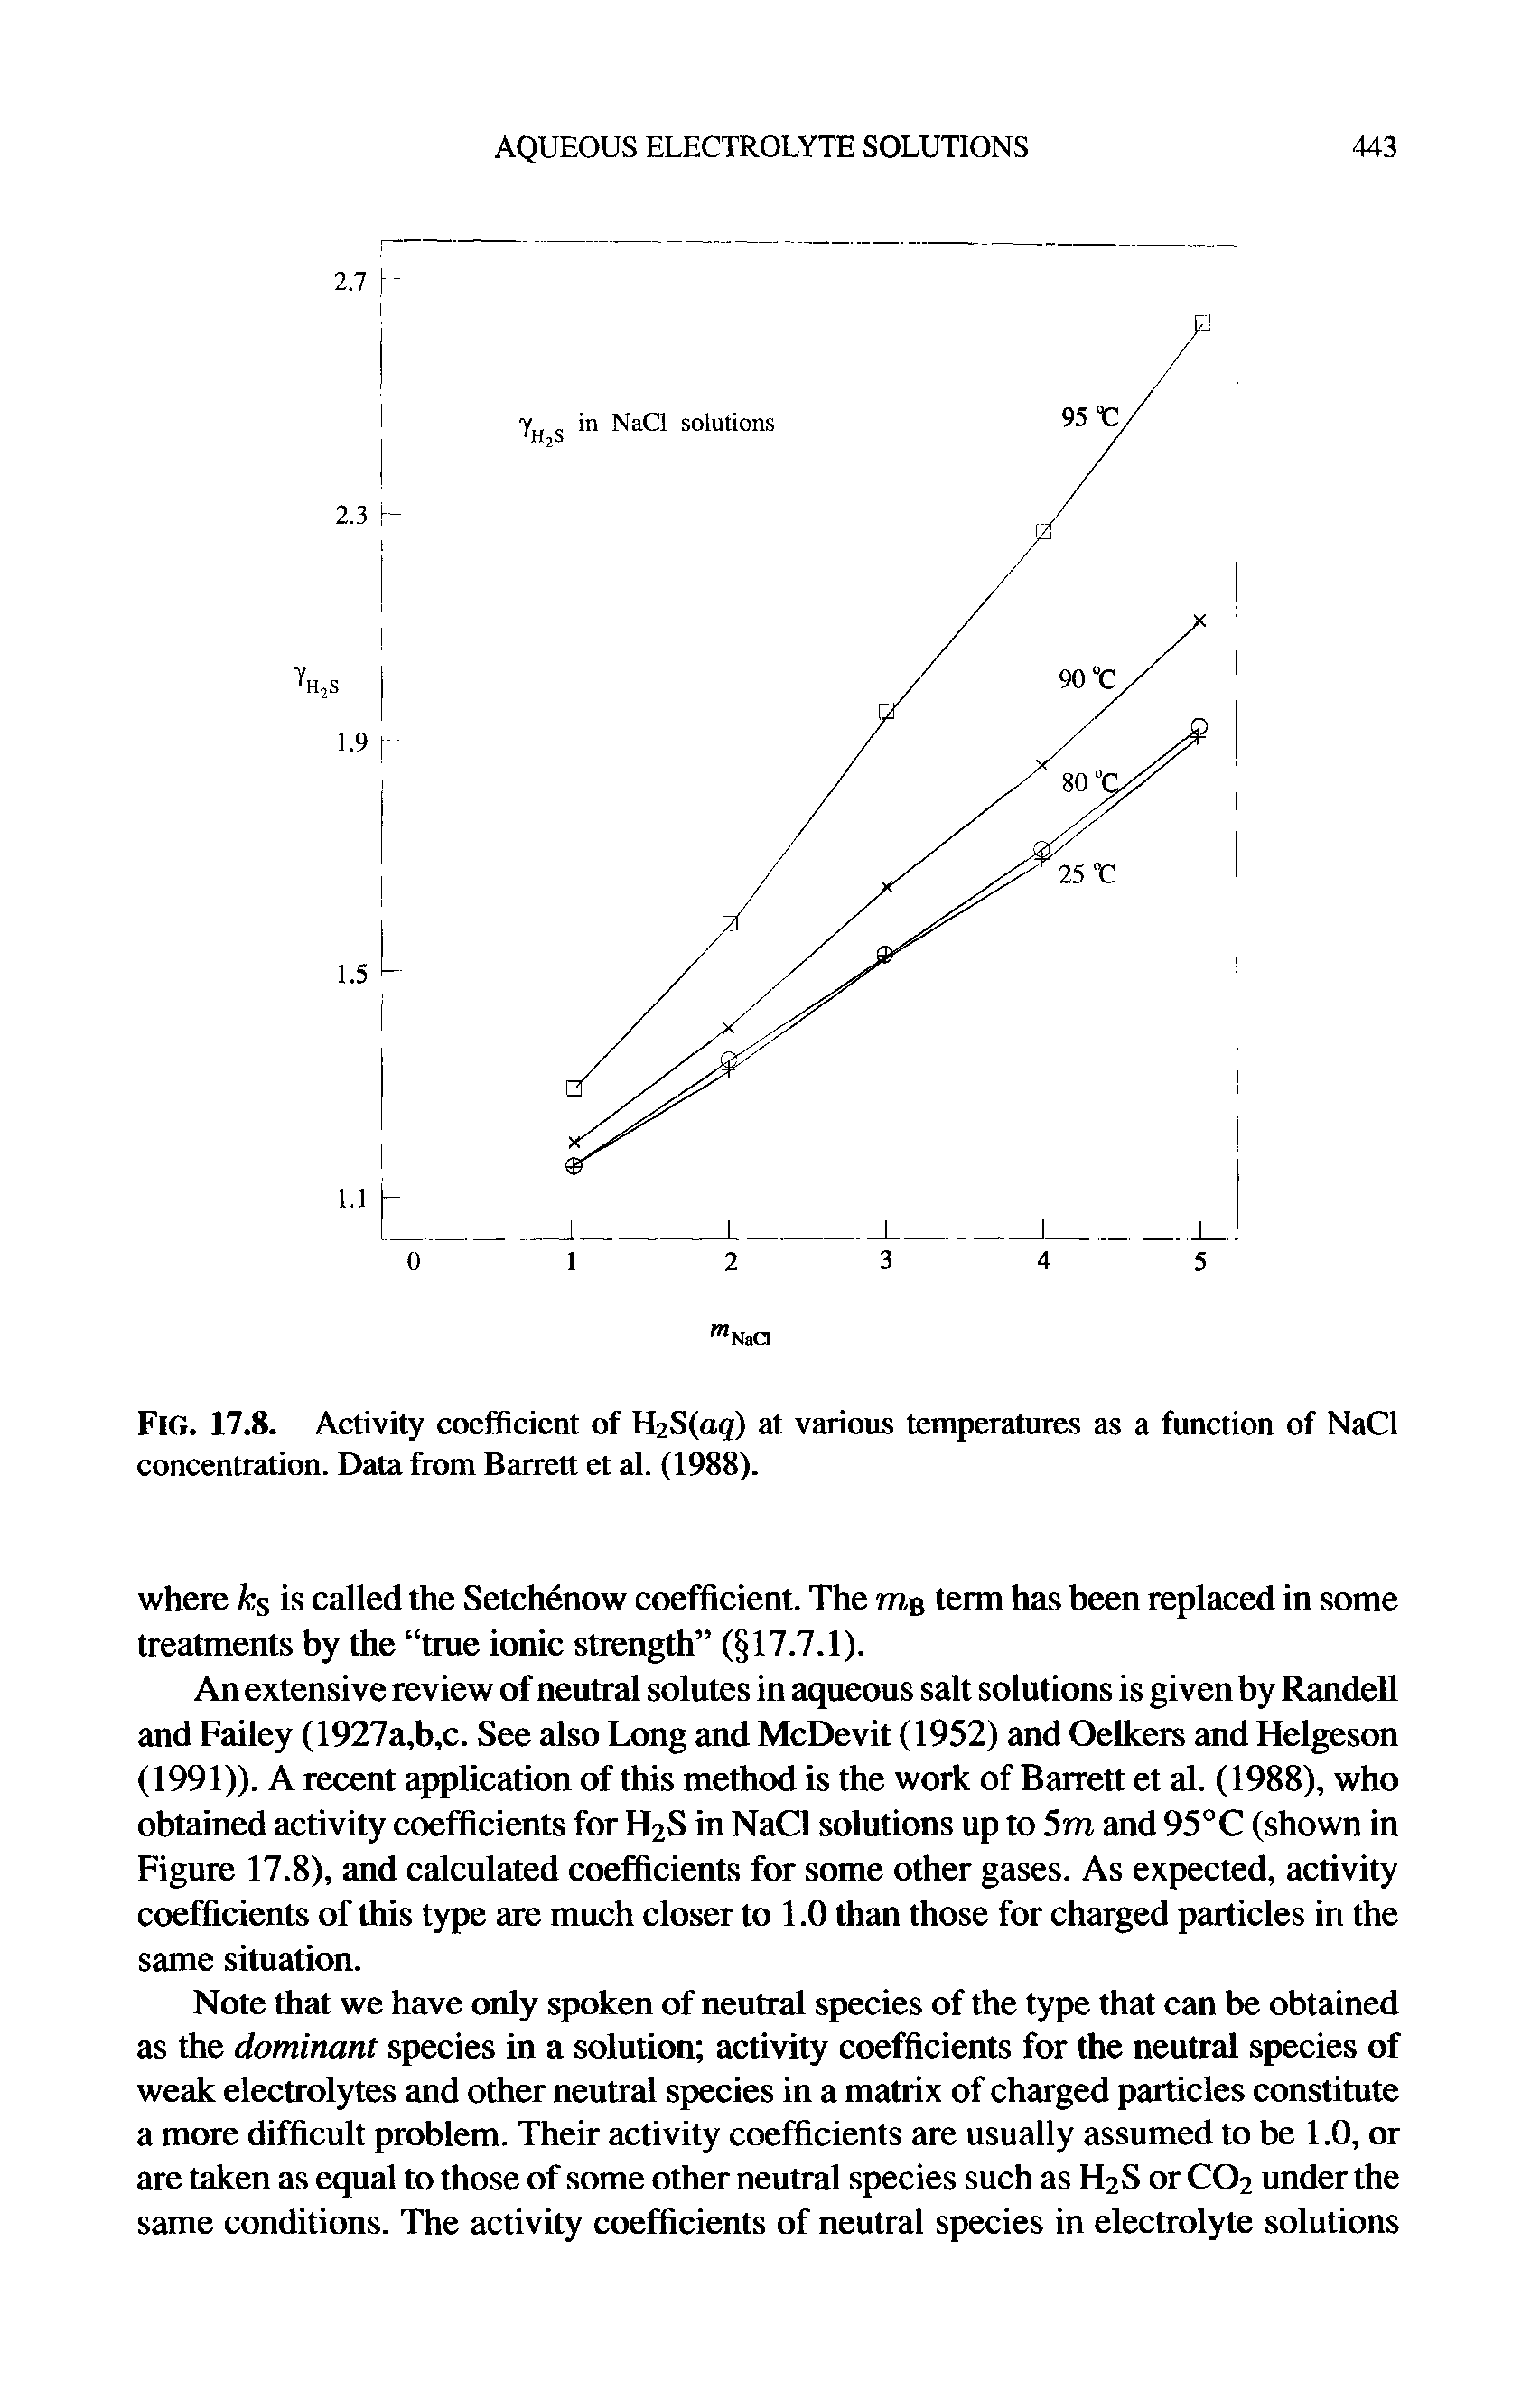 Fig. 17.8. Activity coefficient of H2S(ag) at various temperatures as a function of NaCl concentration. Data from Barrett et al. (1988).